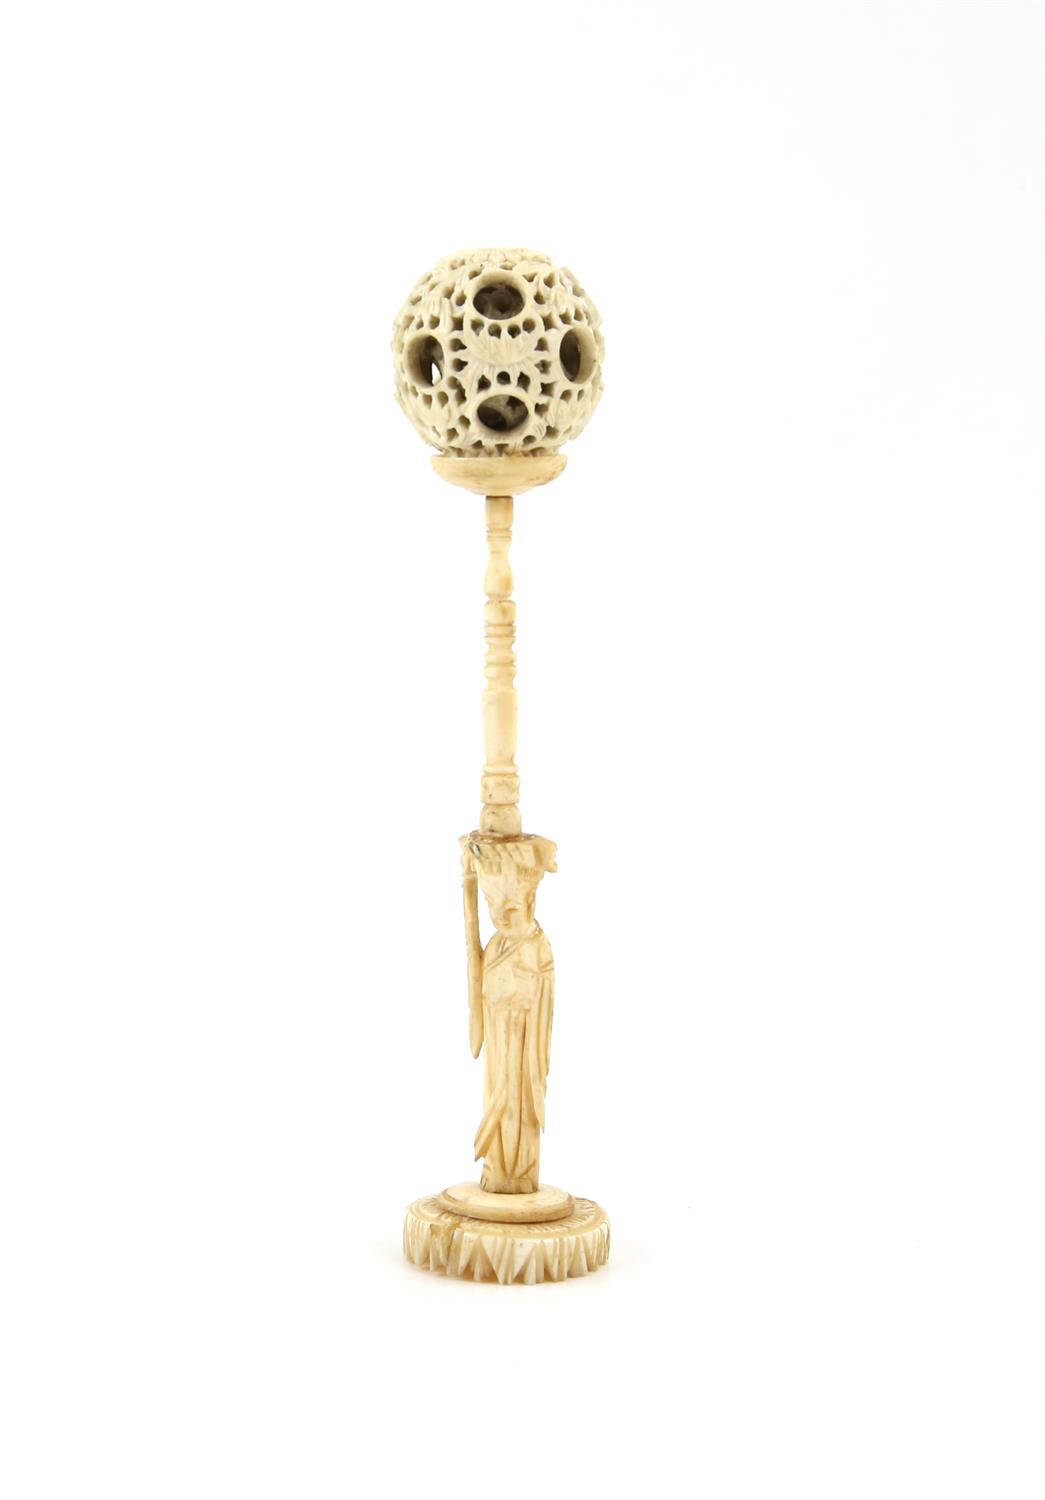 A Chinese Devil's work ball on stand  Carved bone with a puzzle ball and a stand with  a lady : 14. - Image 4 of 7